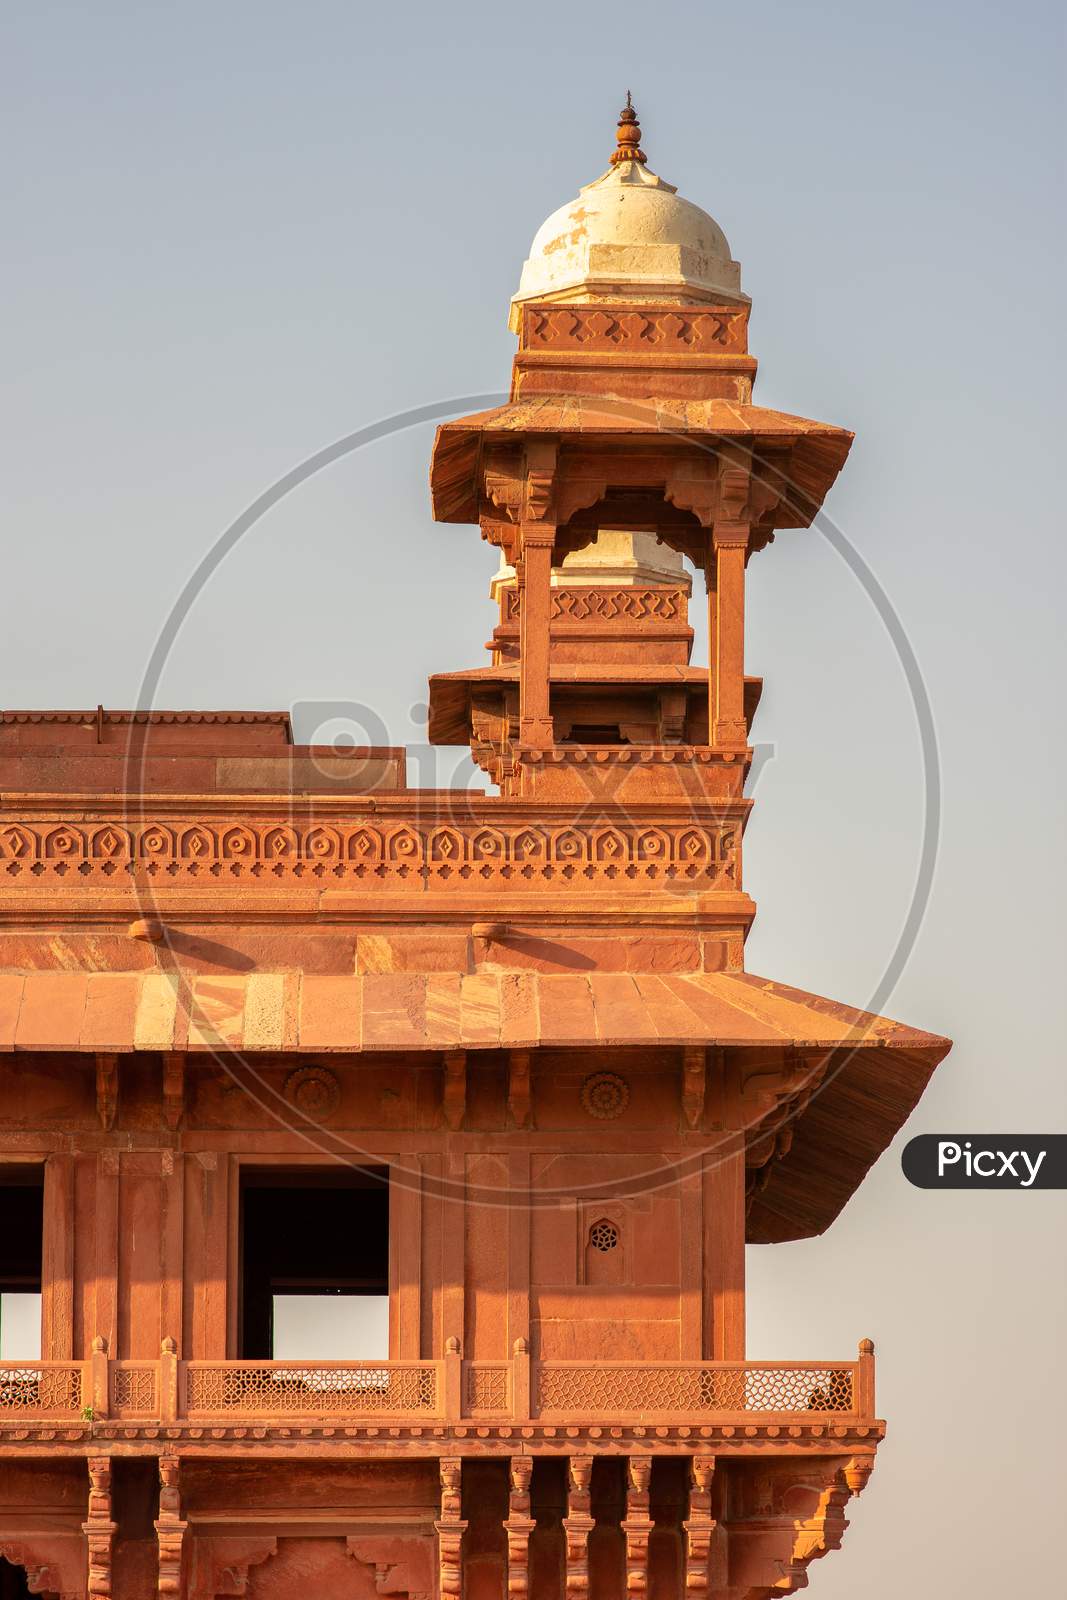 Old Red Sandstone Palace At The Mughal City Of Fatehpur Sikri In Agra, India